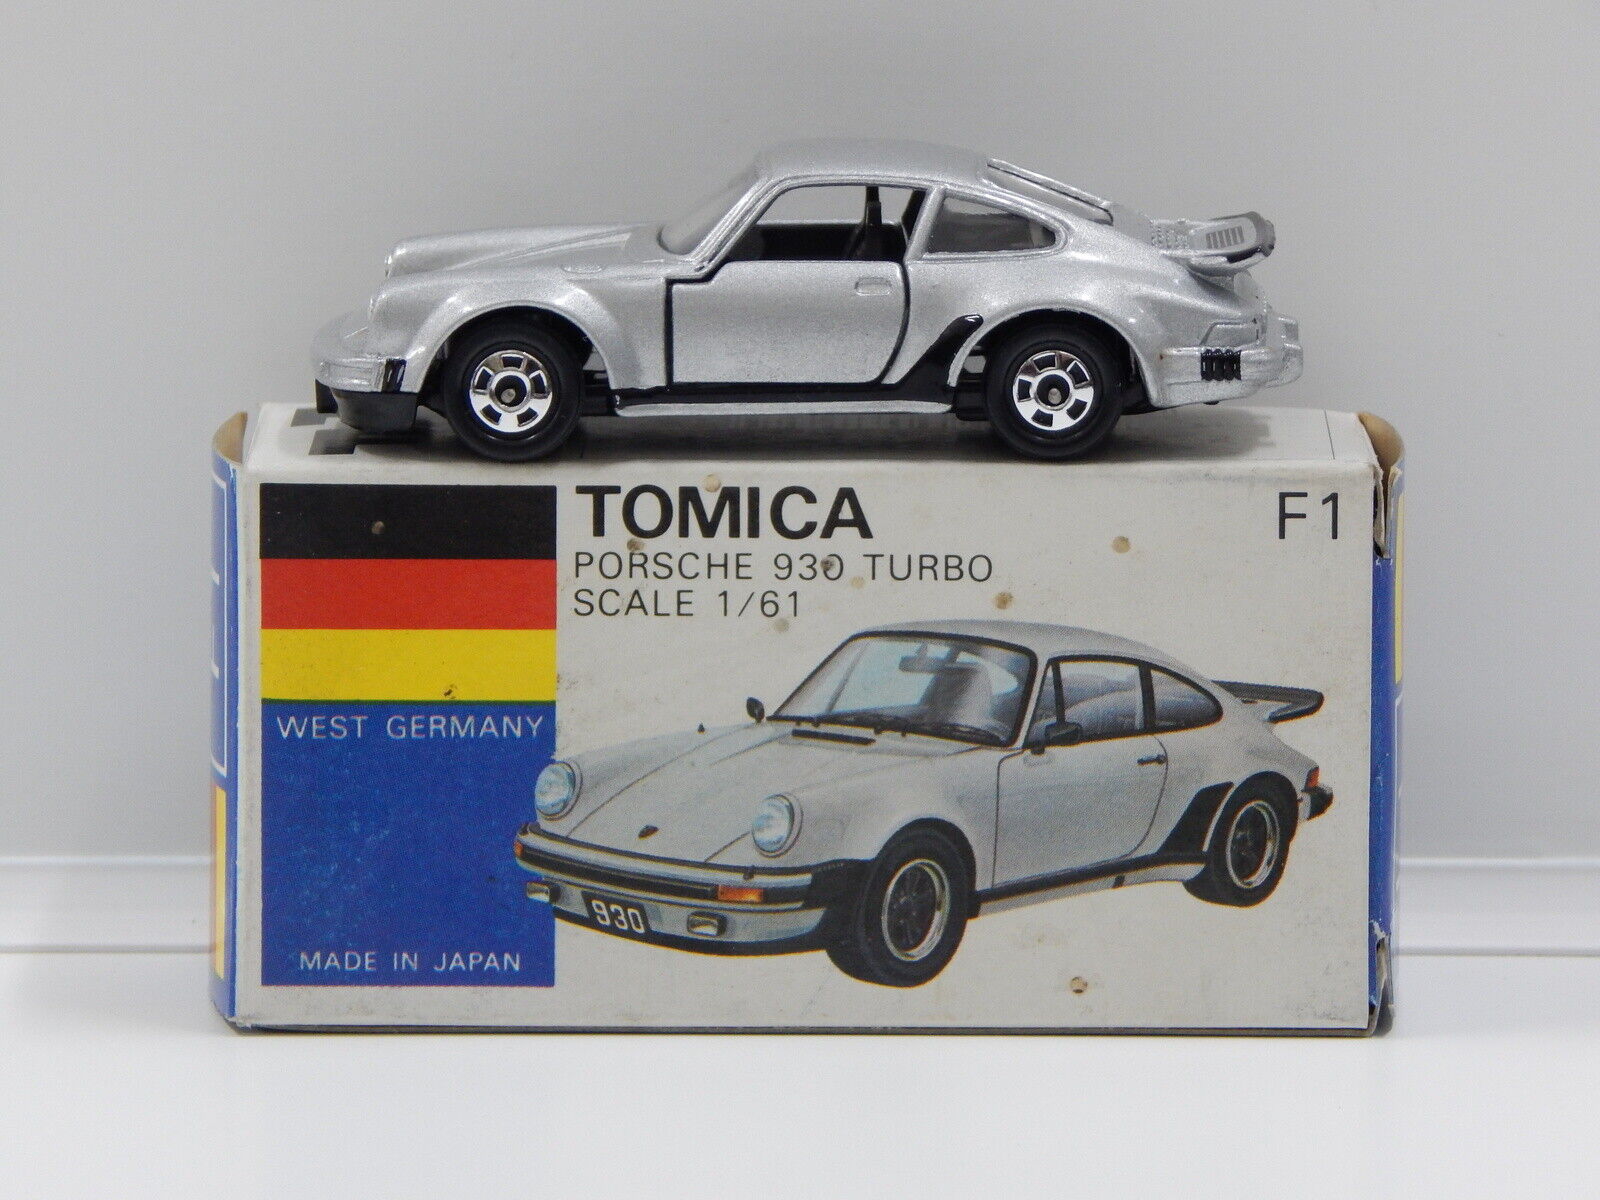 1:61 Porsche 930 Turbo (Silver) - Made in Japan Tomica F1